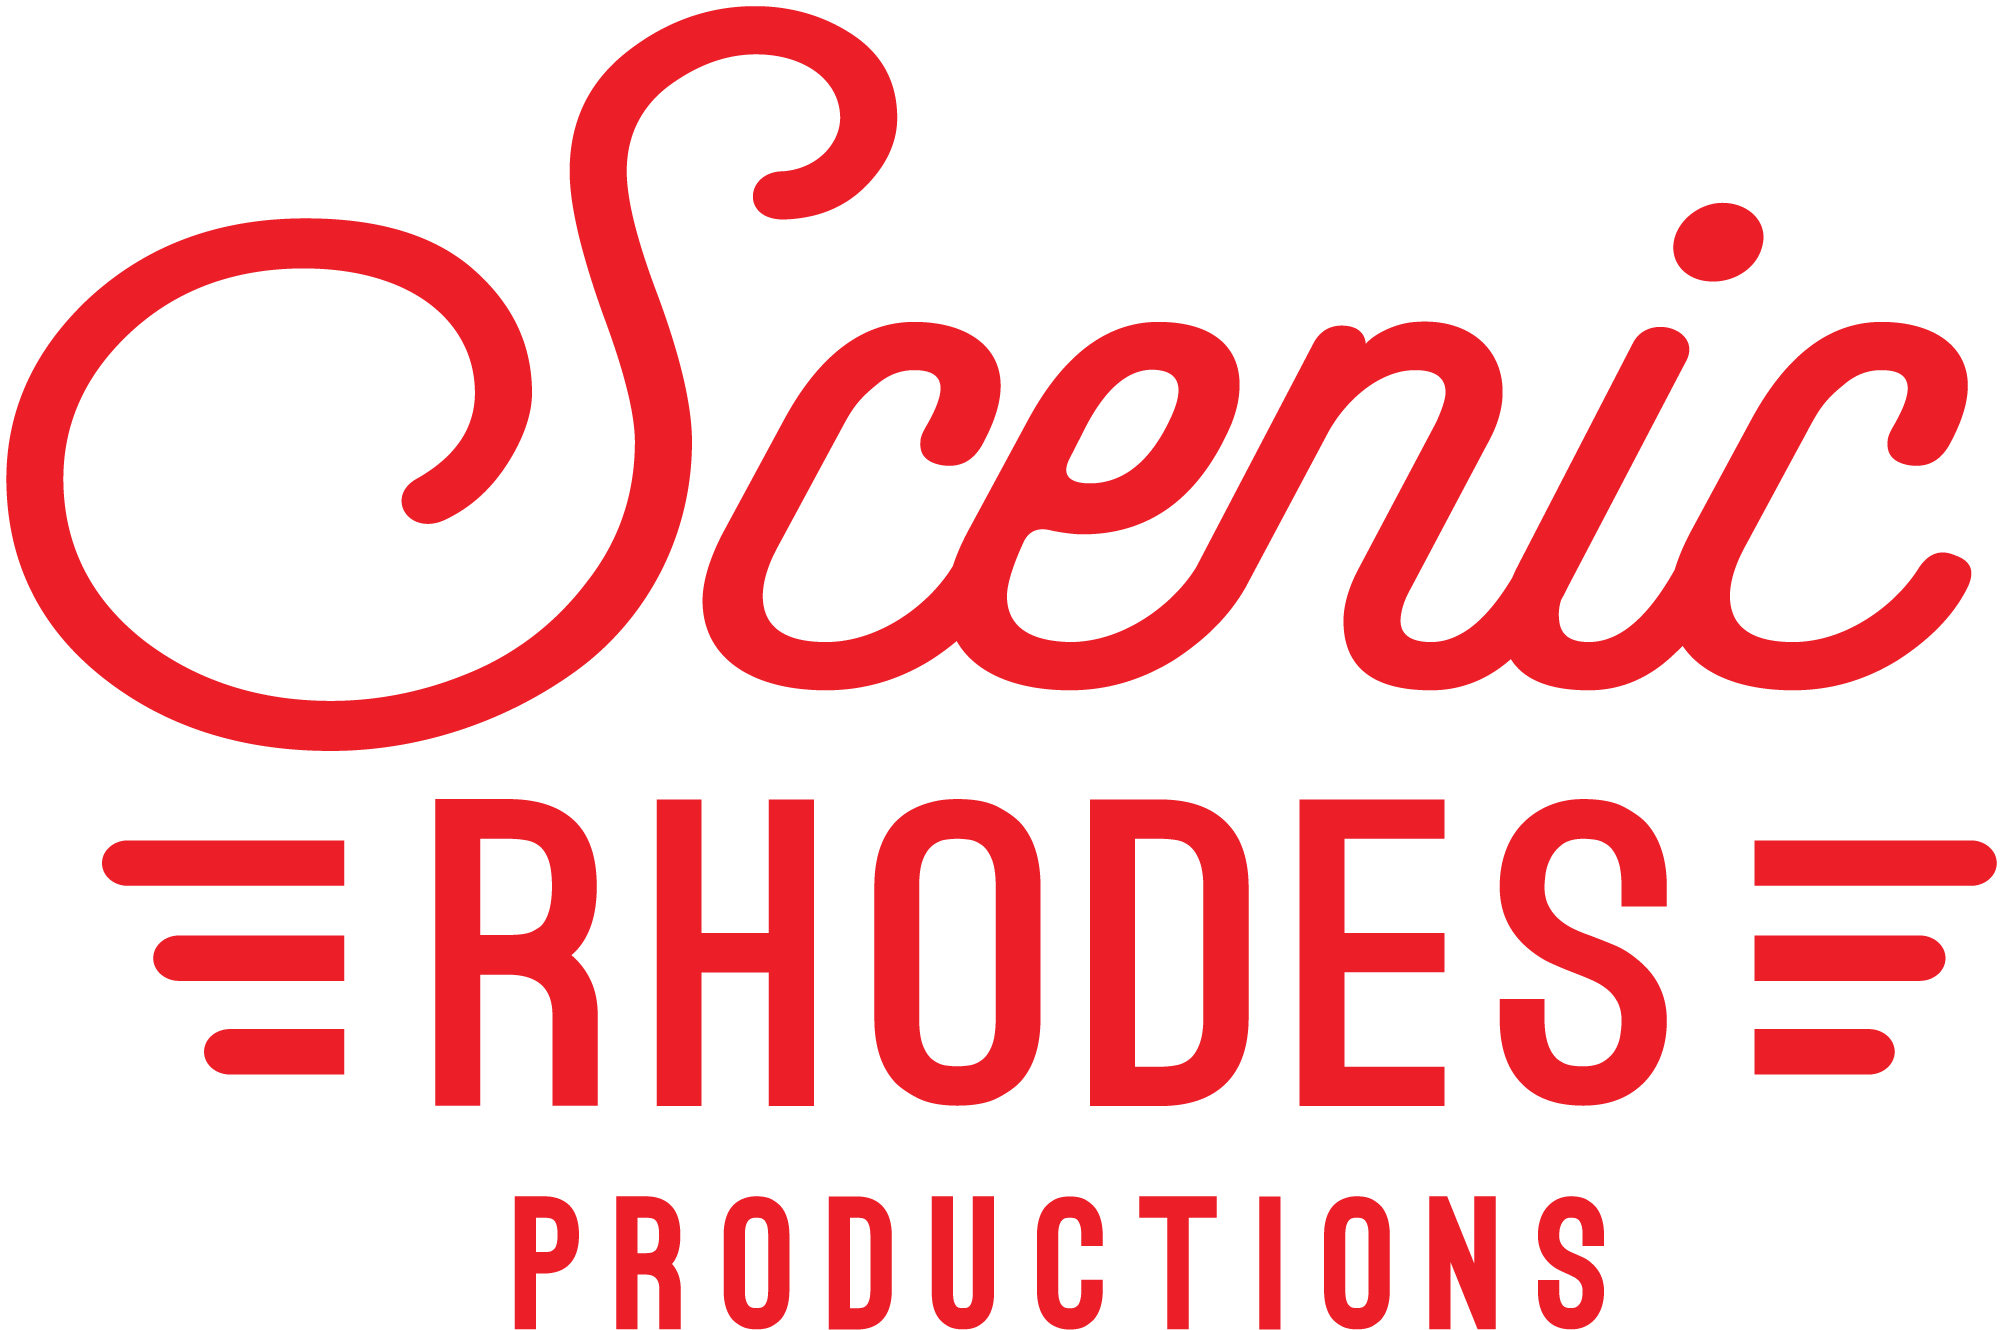 Scenic Rhodes Productions